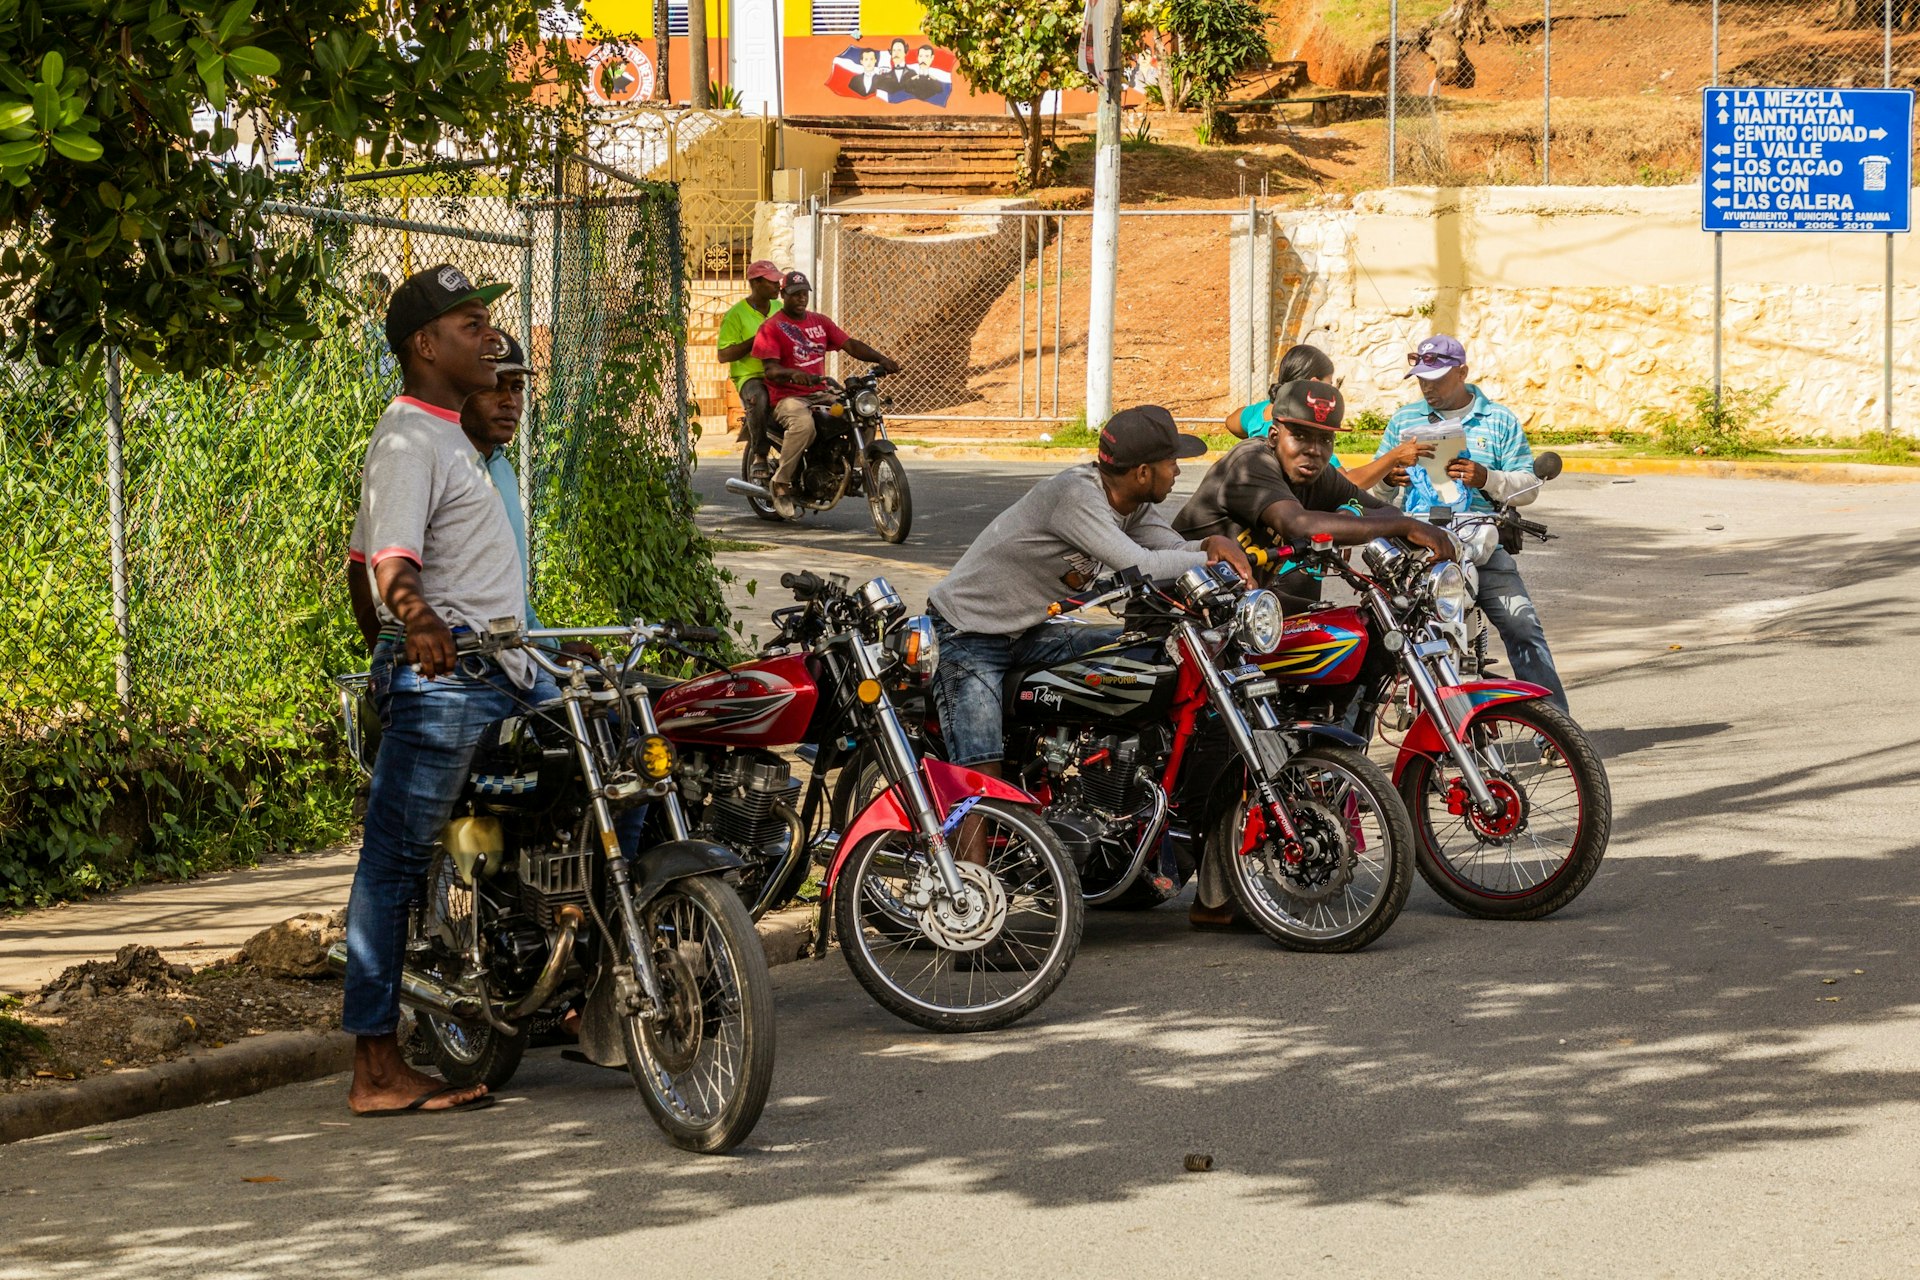 A group of motorbike drivers line up on the street waiting for passengers in Samana, Dominican Republic.